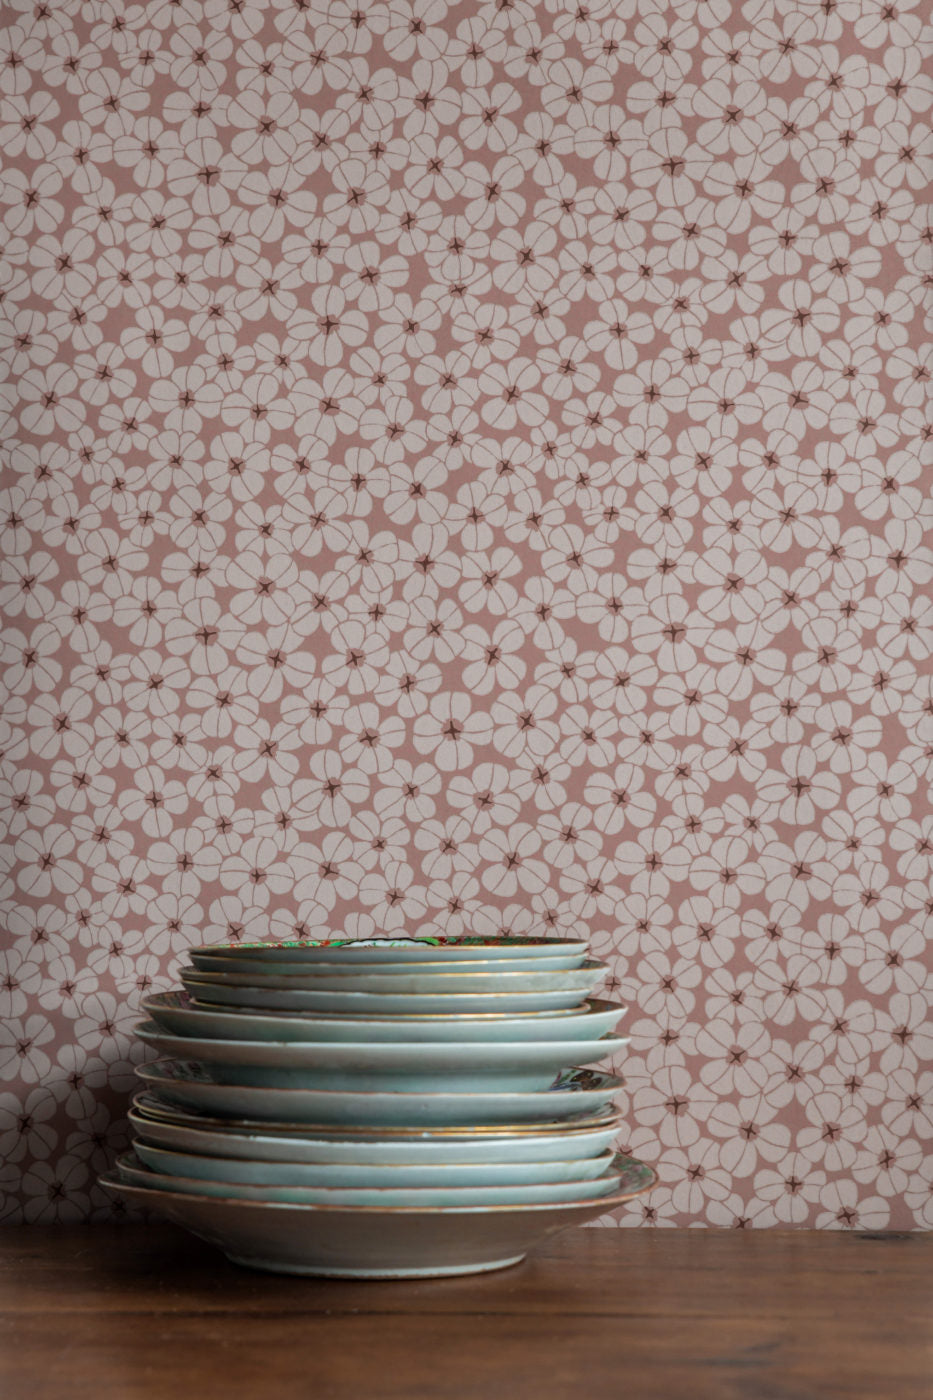 The oxalis forms a shower of flowers in this wallpaper design.